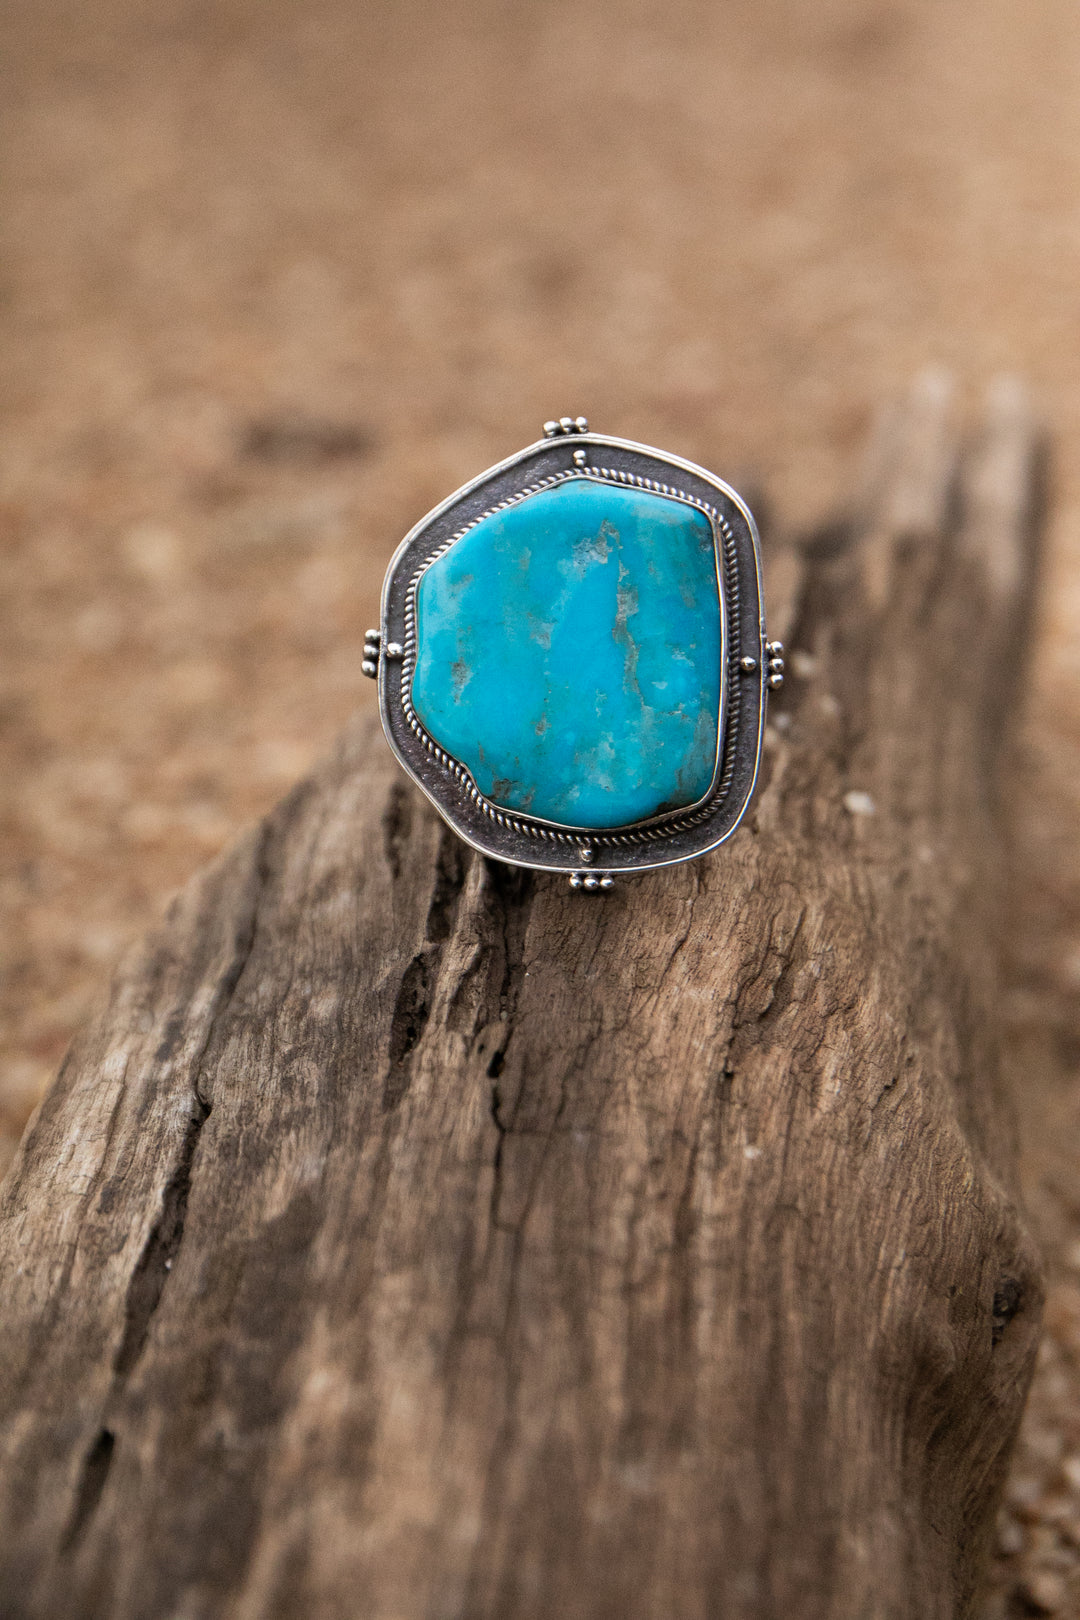 Statement Arizona Turquoise Ring set in Tribal Sterling Silver - Size 10 US